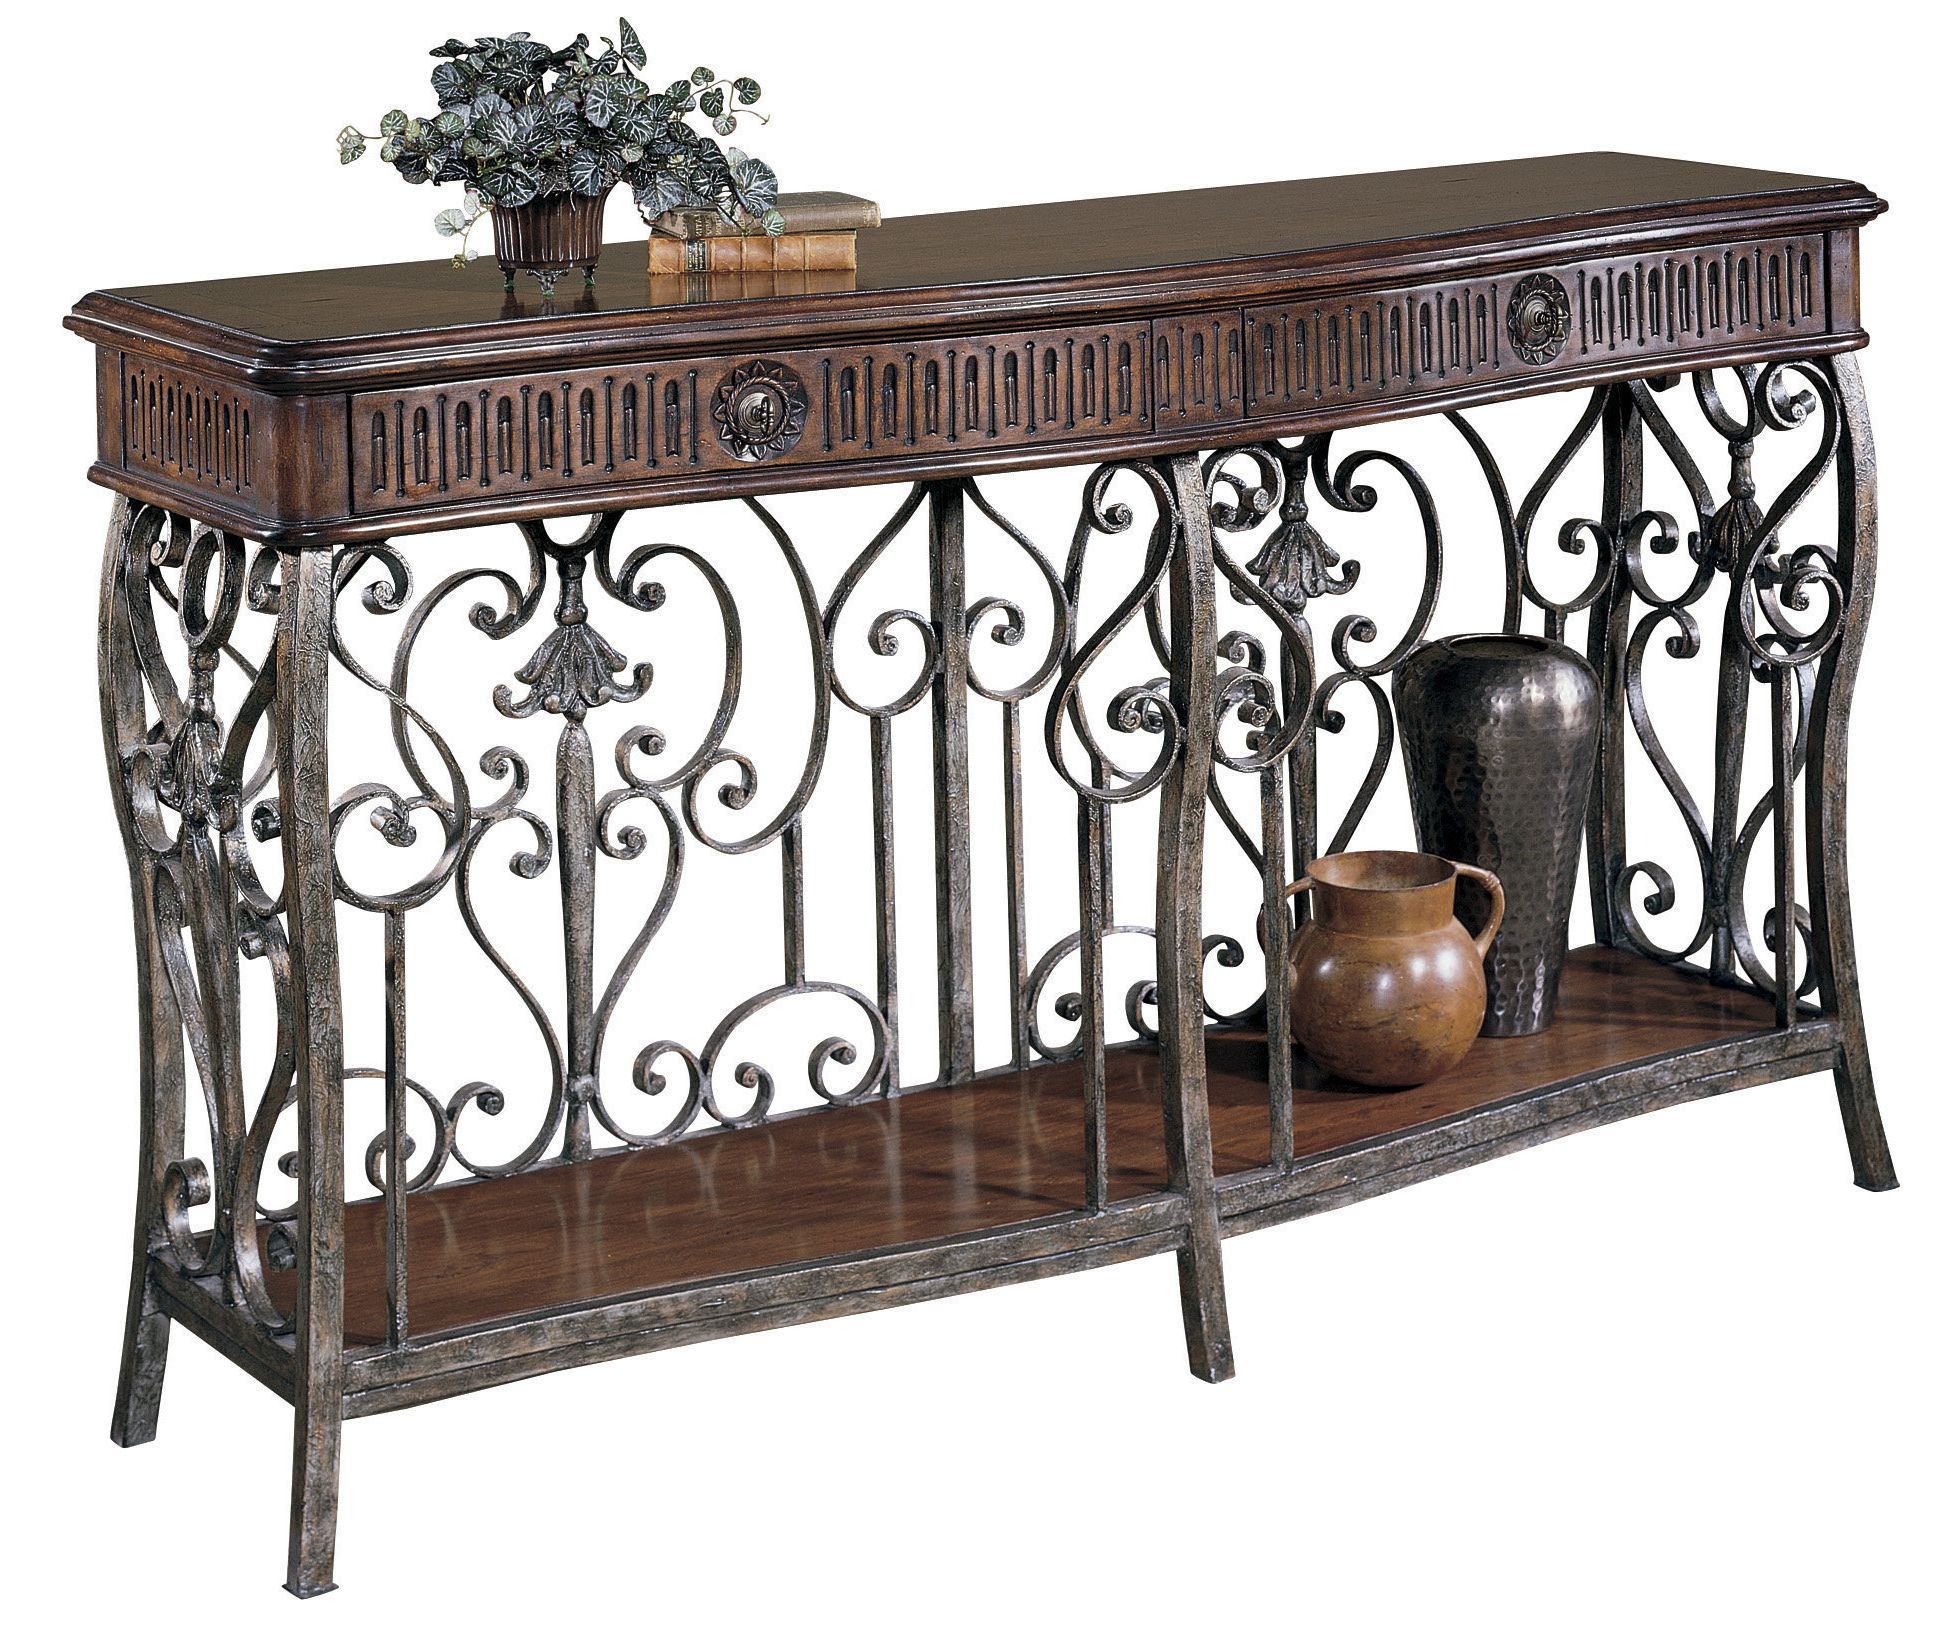 Distressed Console Table With Metal – Classic Wood Accent Furniture In Recent Distressed Iron 4 Shelf Desks (View 9 of 15)